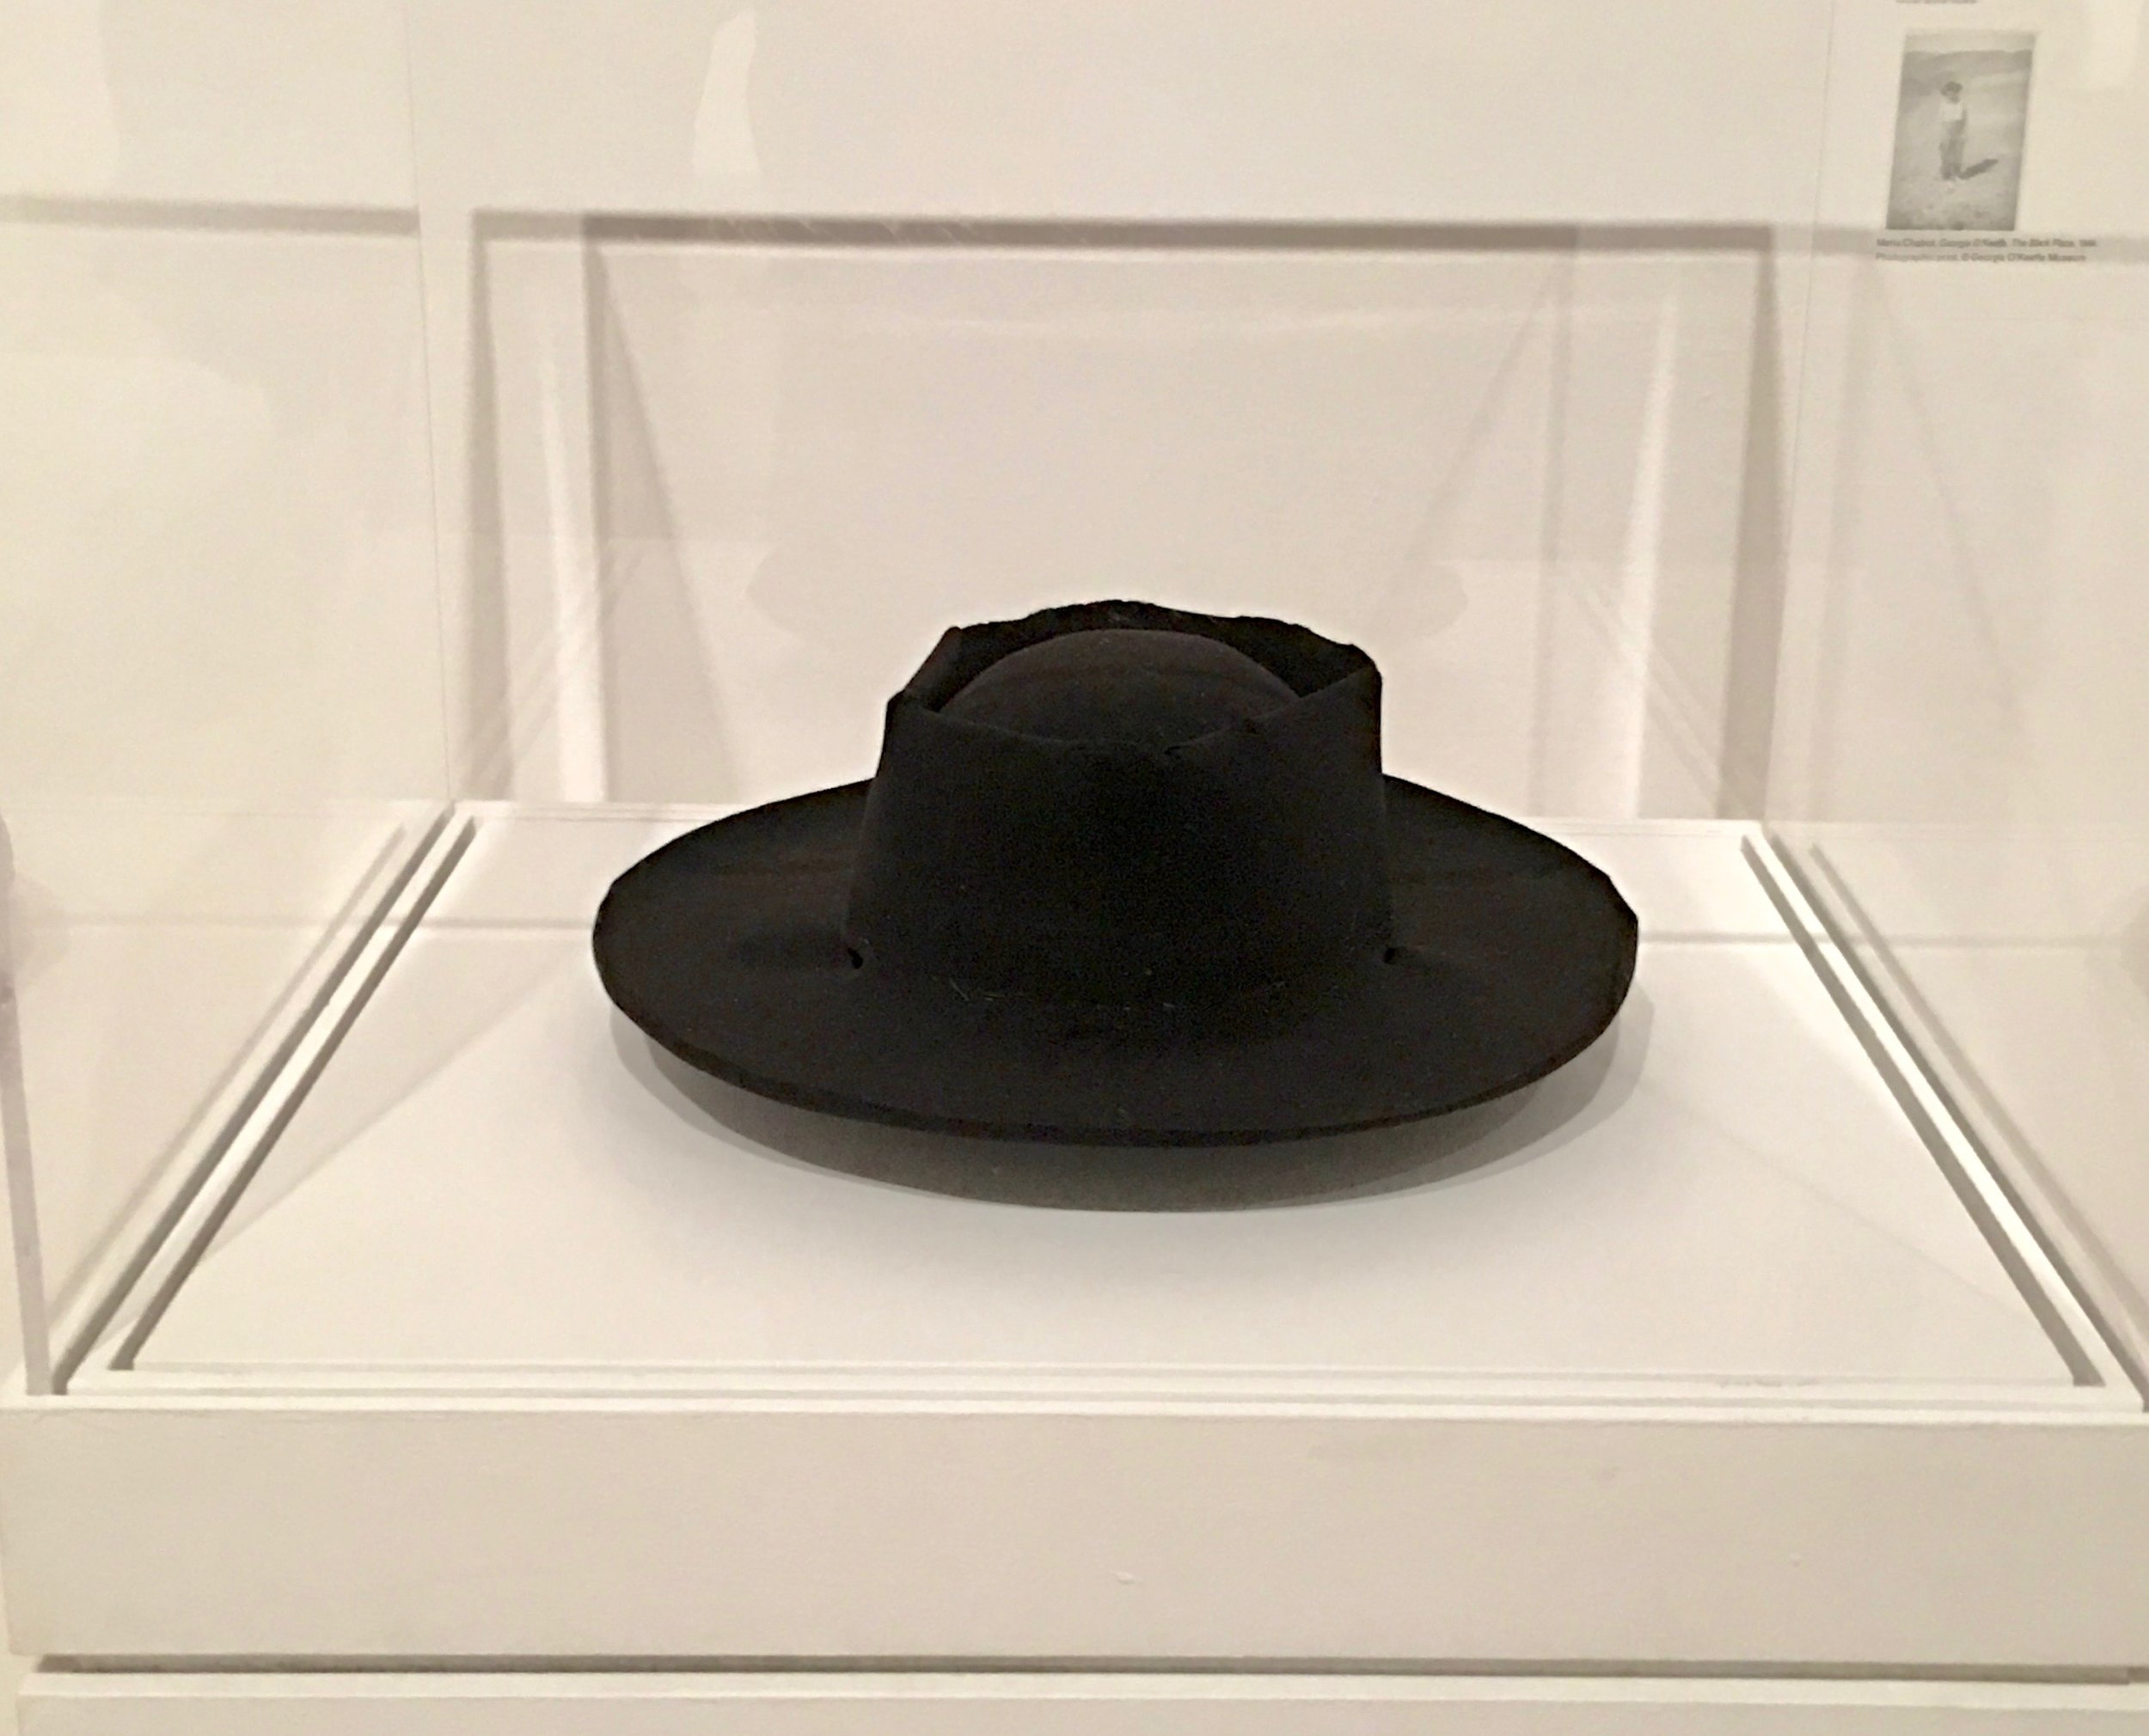 O'Keefe's Hat